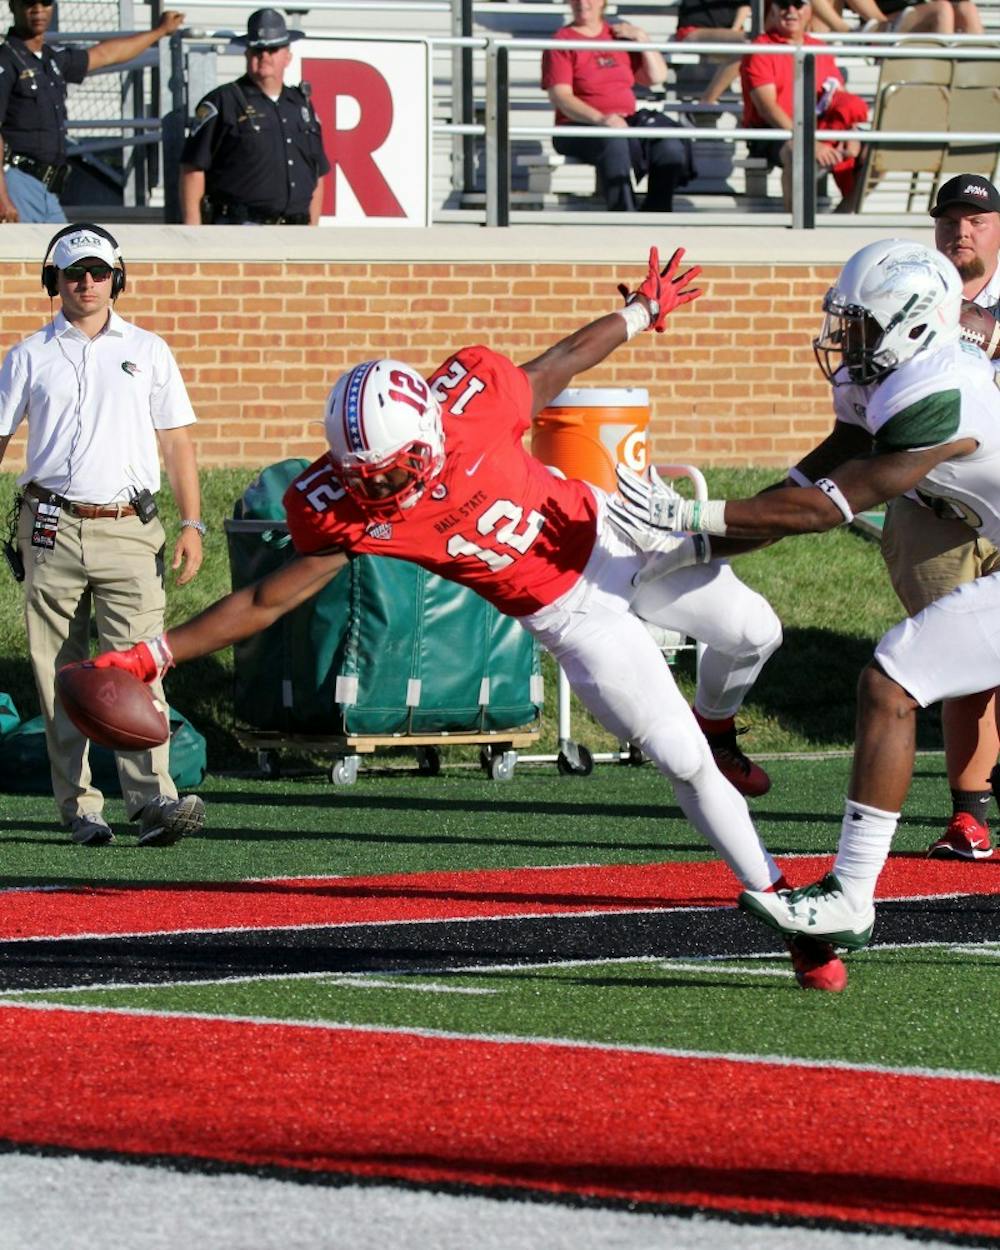 Ball State freshman wide receiver Justin Hall falls into the end zone with 8:26 remaining in the fourth quarter of the Cardinals’ game against UAB on Sept. 9 at Scheumann Stadium. Hall’s touchdown put Ball State up 51-24. Paige Grider, DN File